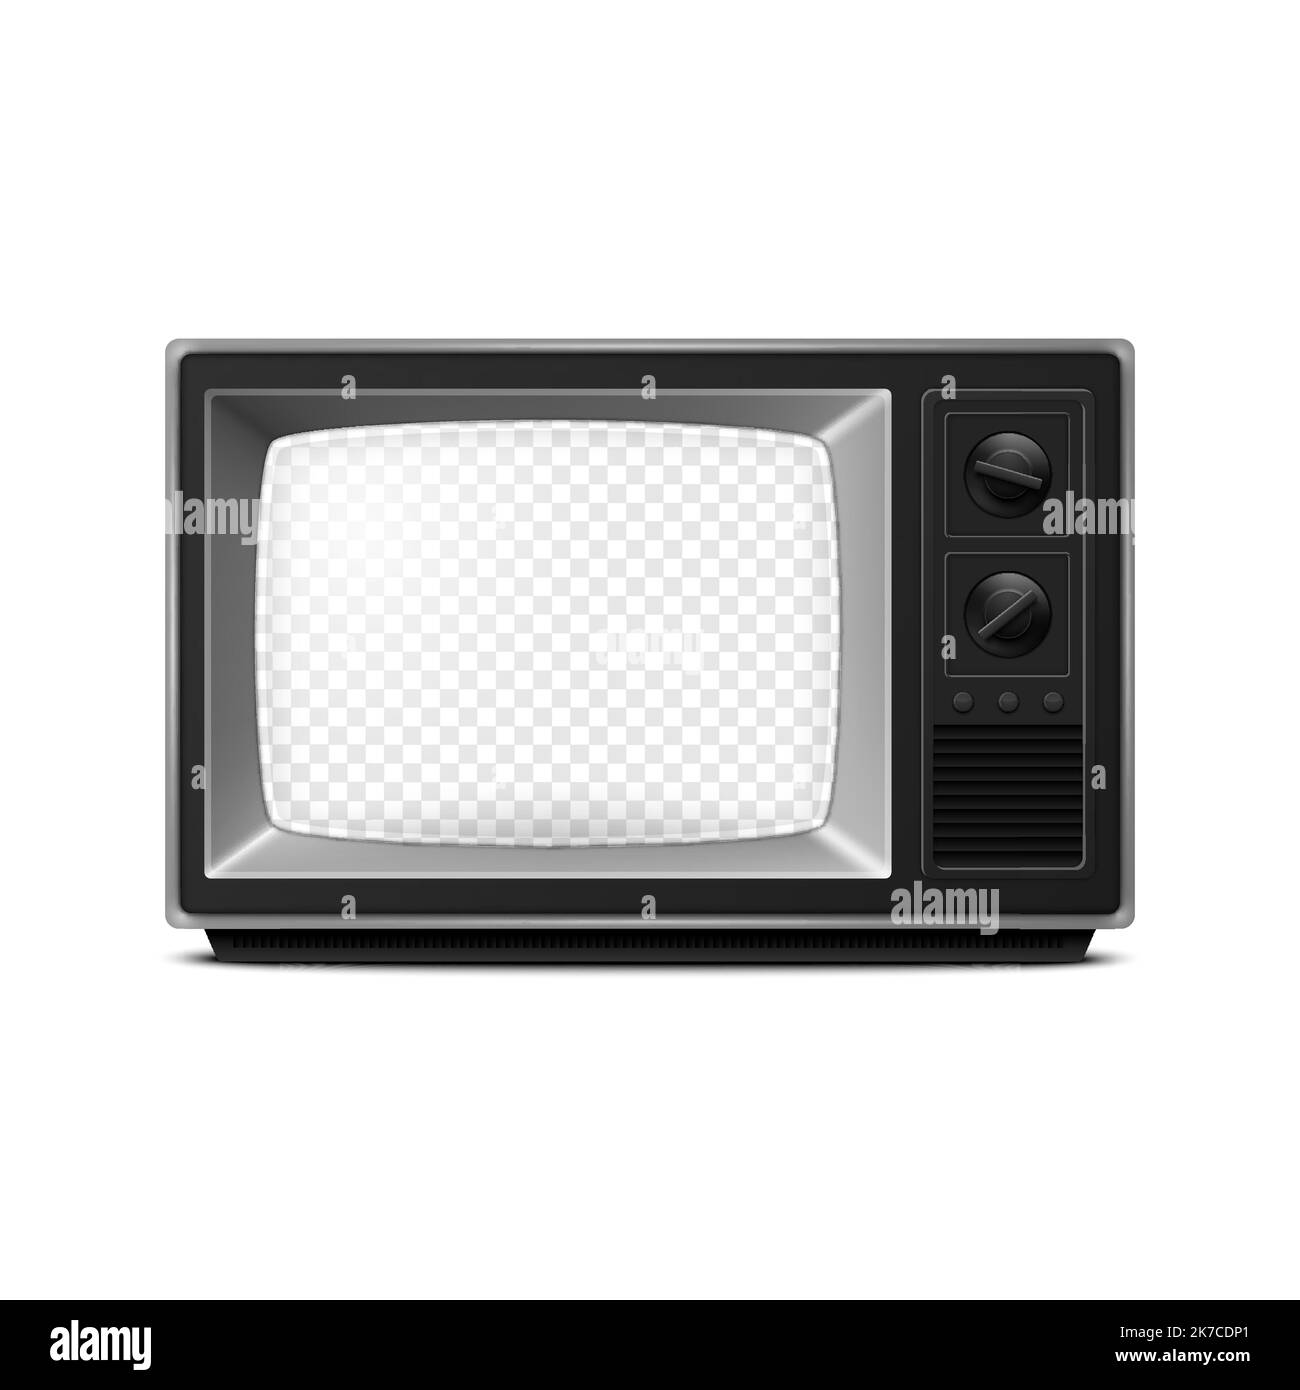 Vector 3d Realistic Retro TV Receiver with Transparent Screen Isolated on White Background. Home Interior Design Concept. Vintage TV Set, Television Stock Vector